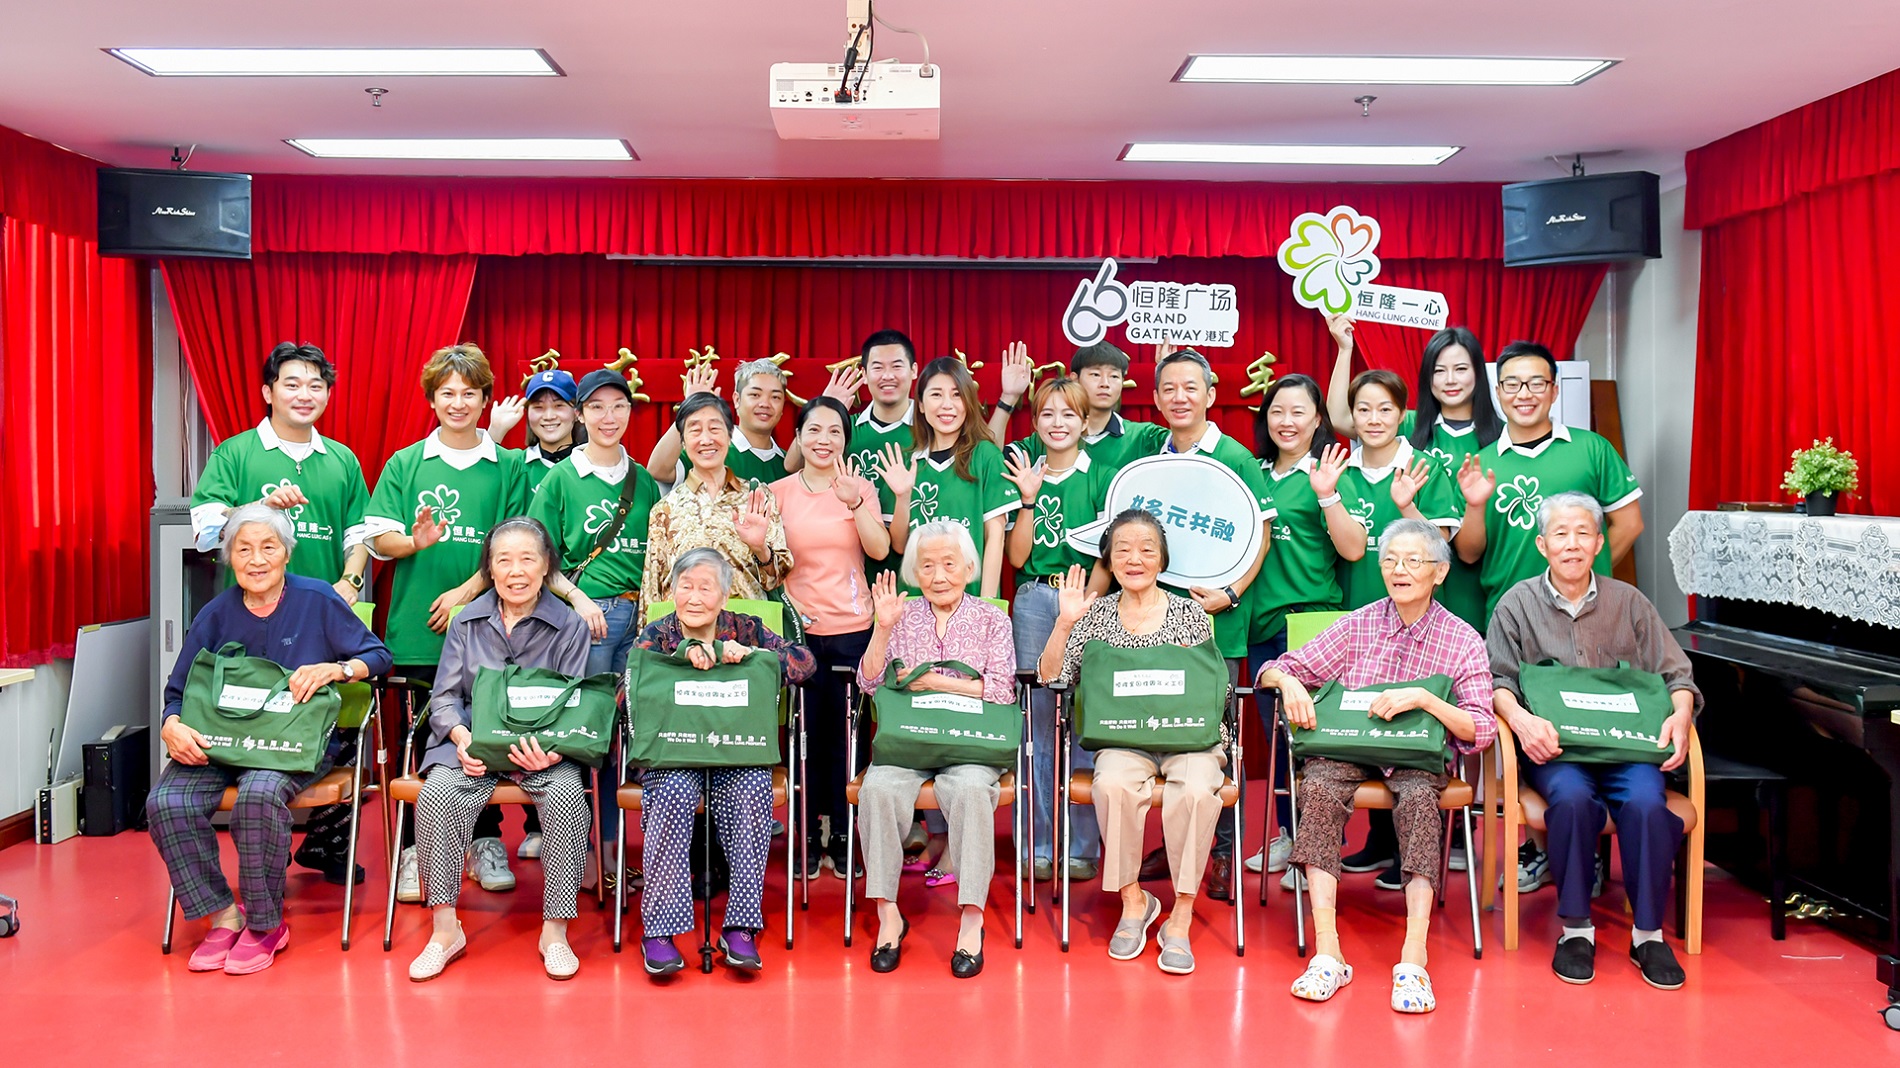 Led by corporate management teams, volunteers from Plaza 66 and Grand Gateway 66 in Shanghai, together with several hairdressers, offer free haircutting services for elderly dementia patients in elderly centers